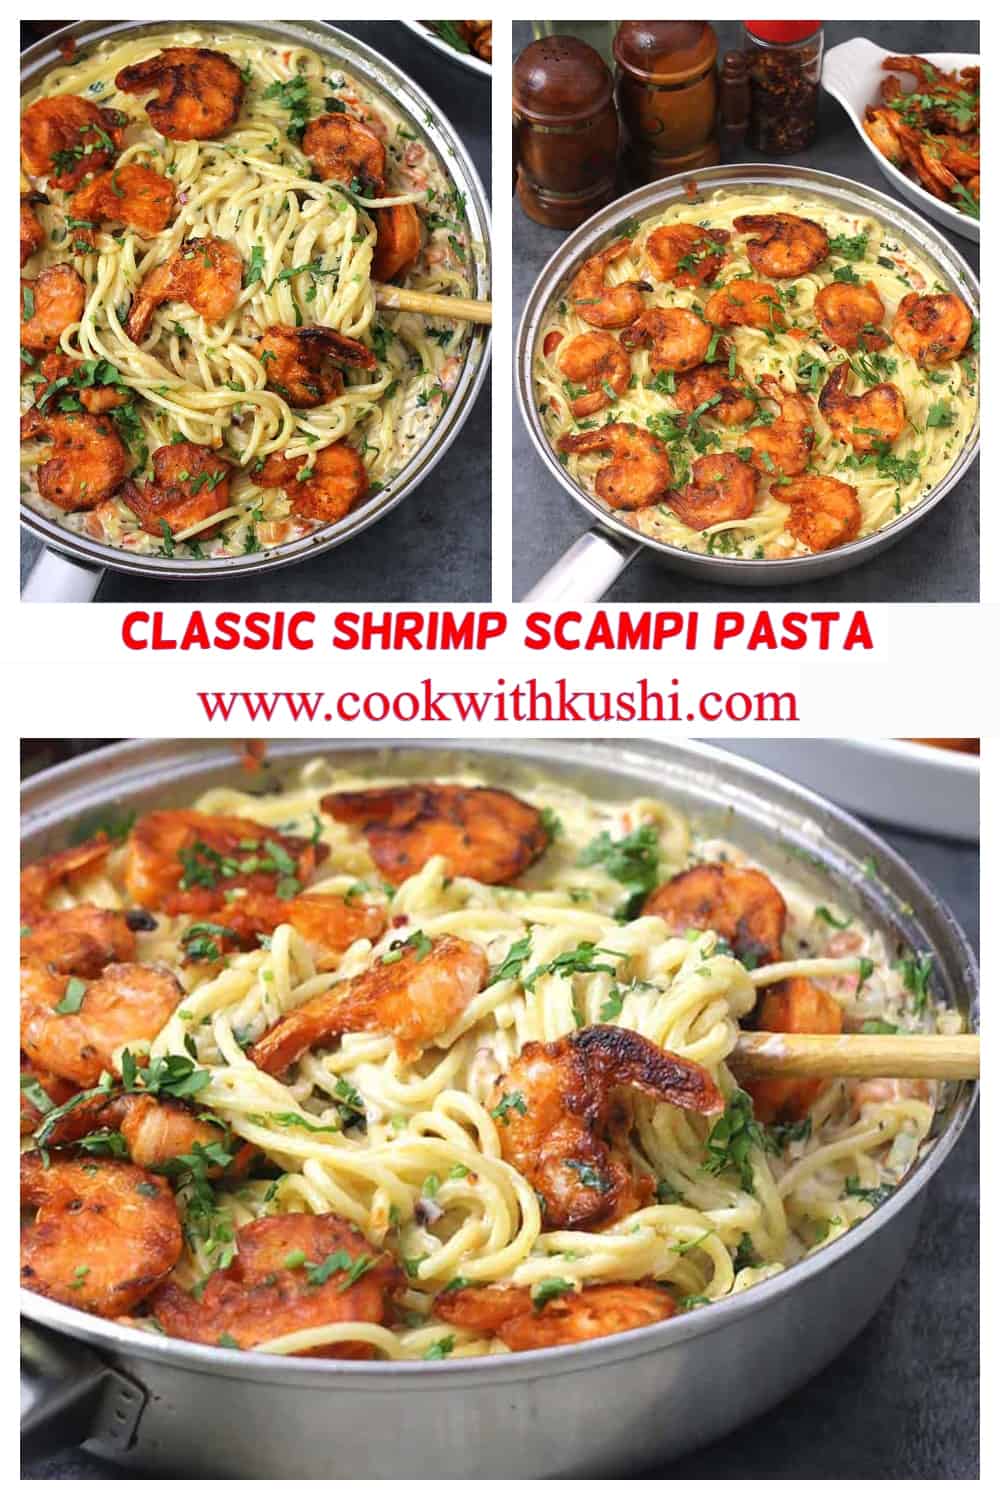 A collage of pics showing classic restaurant-style shrimp scampi pasta.